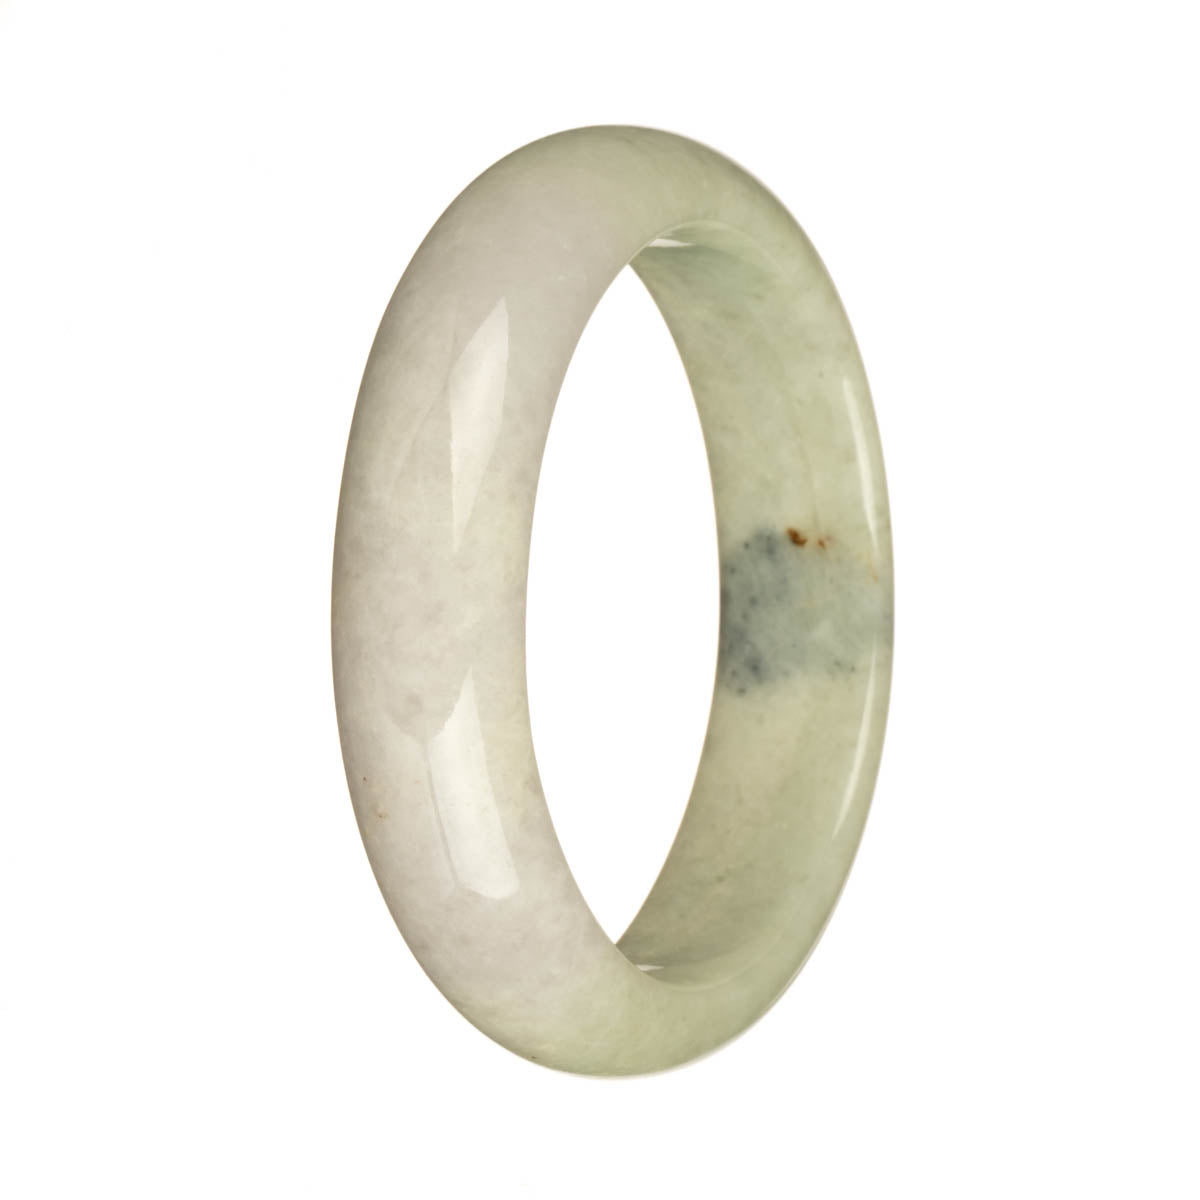 A beautiful jade bangle bracelet in pale green and pale lavender colors with a deep green patch. It features a traditional design and is made of genuine Grade A jade. The bracelet has a half-moon shape and measures 58mm in diameter. Created by MAYS™.